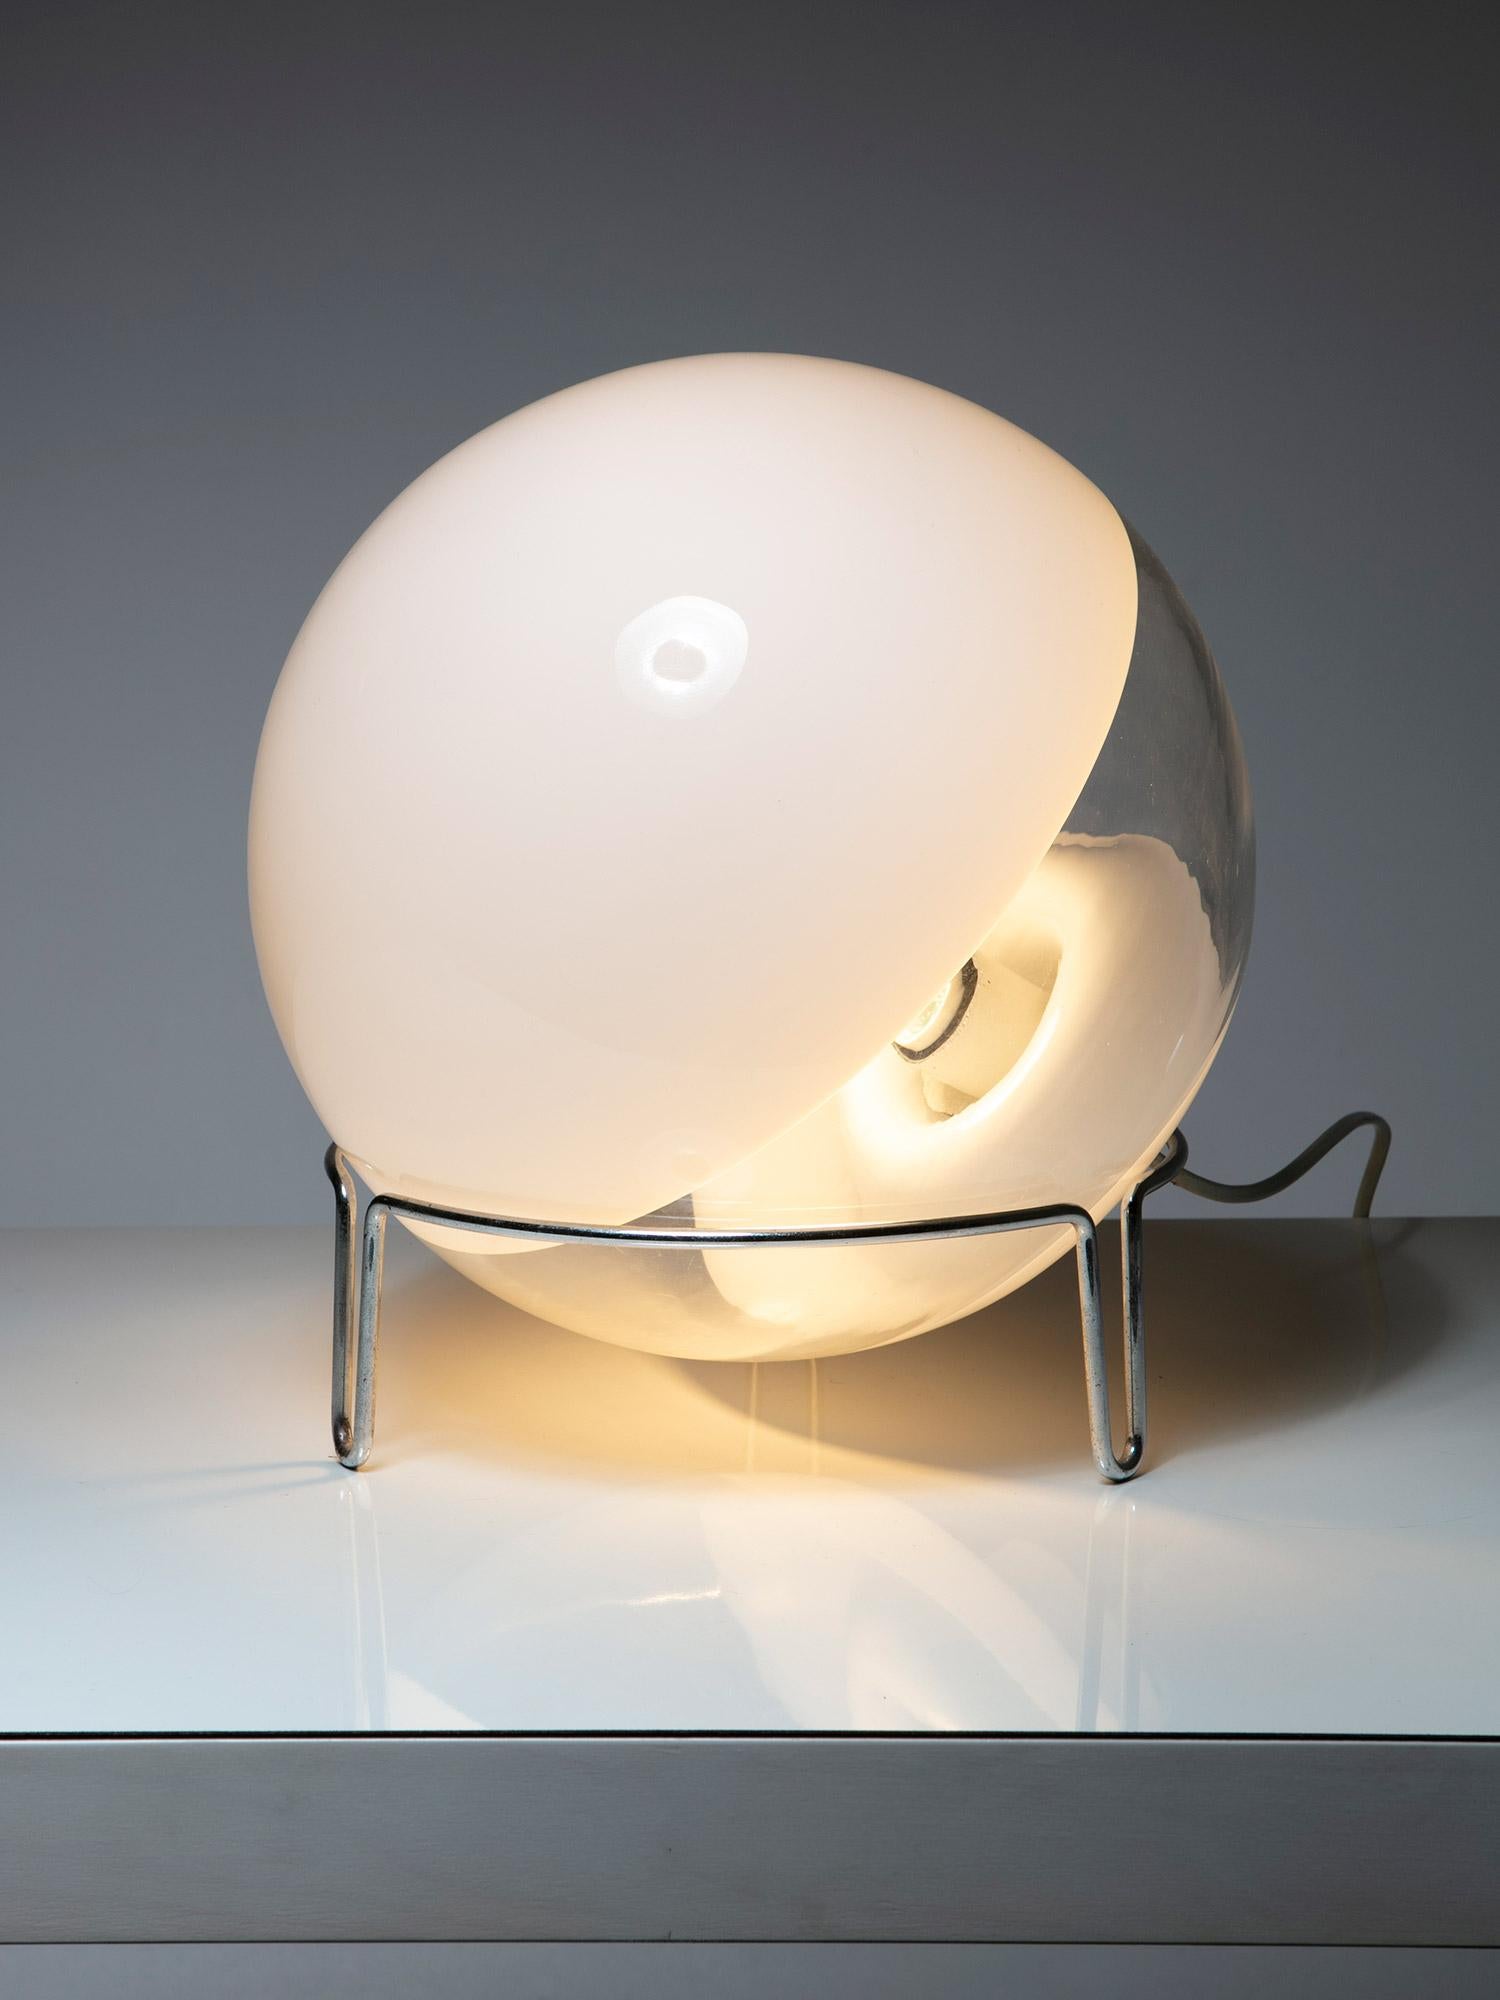 Sfera table lamp by Angelo Mangiarotti for Pollux - Skipper.
A Murano glass sphere laying on a thin steel frame.